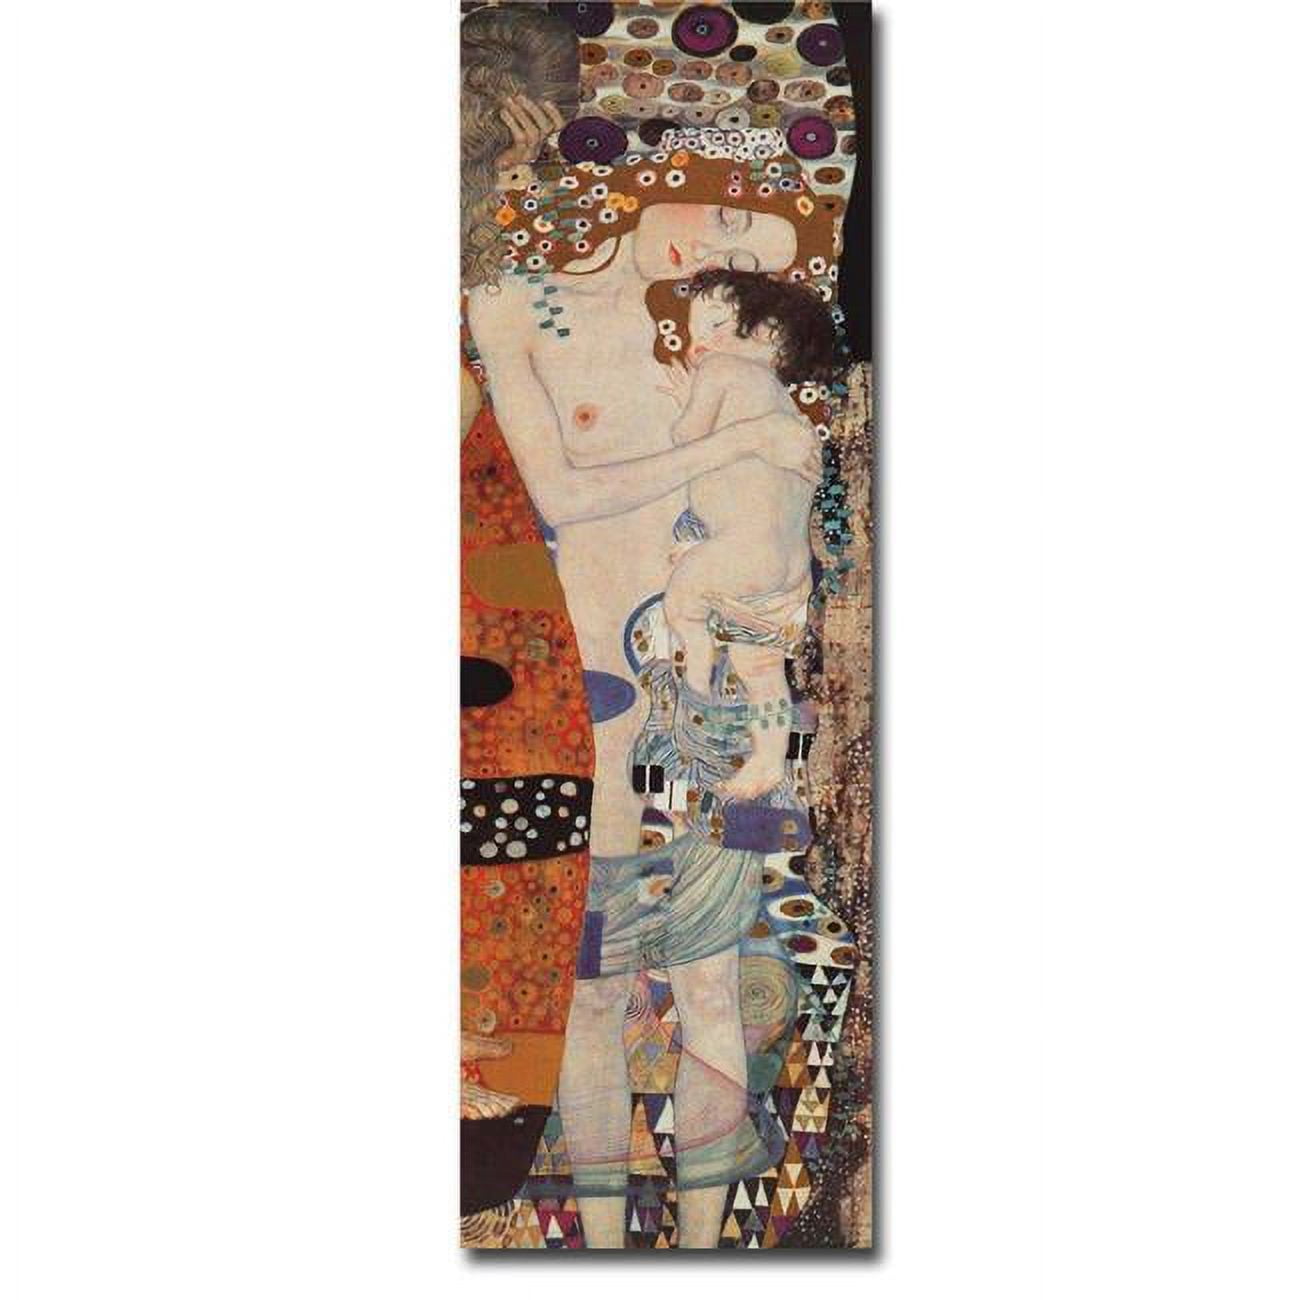 1648585tg Three Ages Of Woman By Gustave Klimt Premium Oversize Gallery-wrapped Canvas Giclee Art - 48 X 16 In.